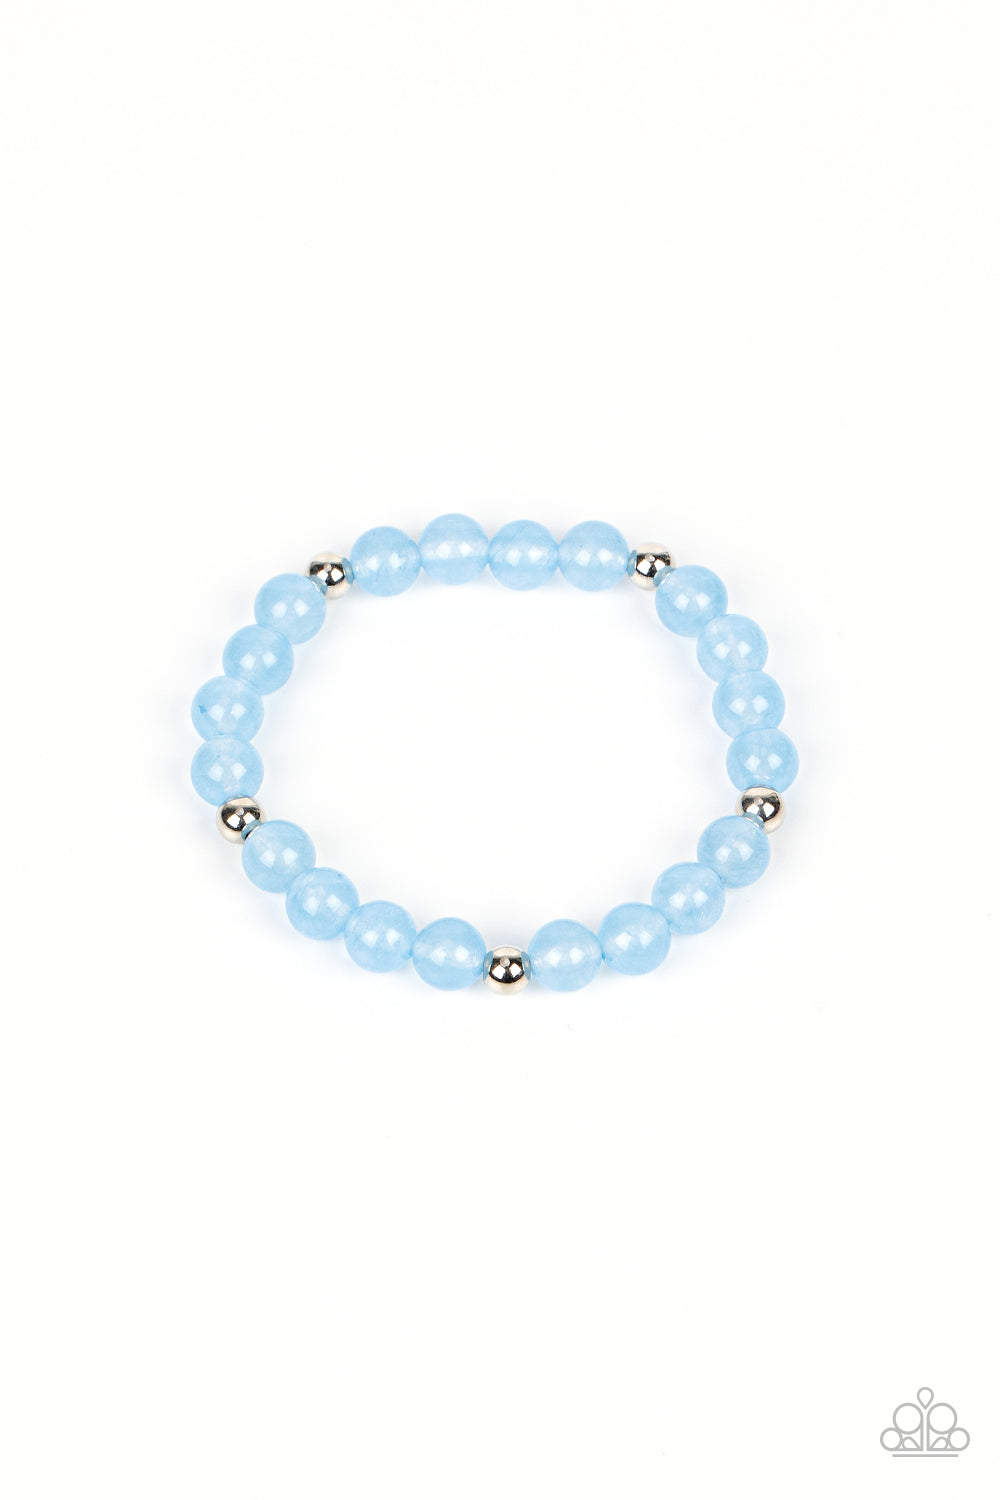 Forever and a DAYDREAM - Blue bracelet